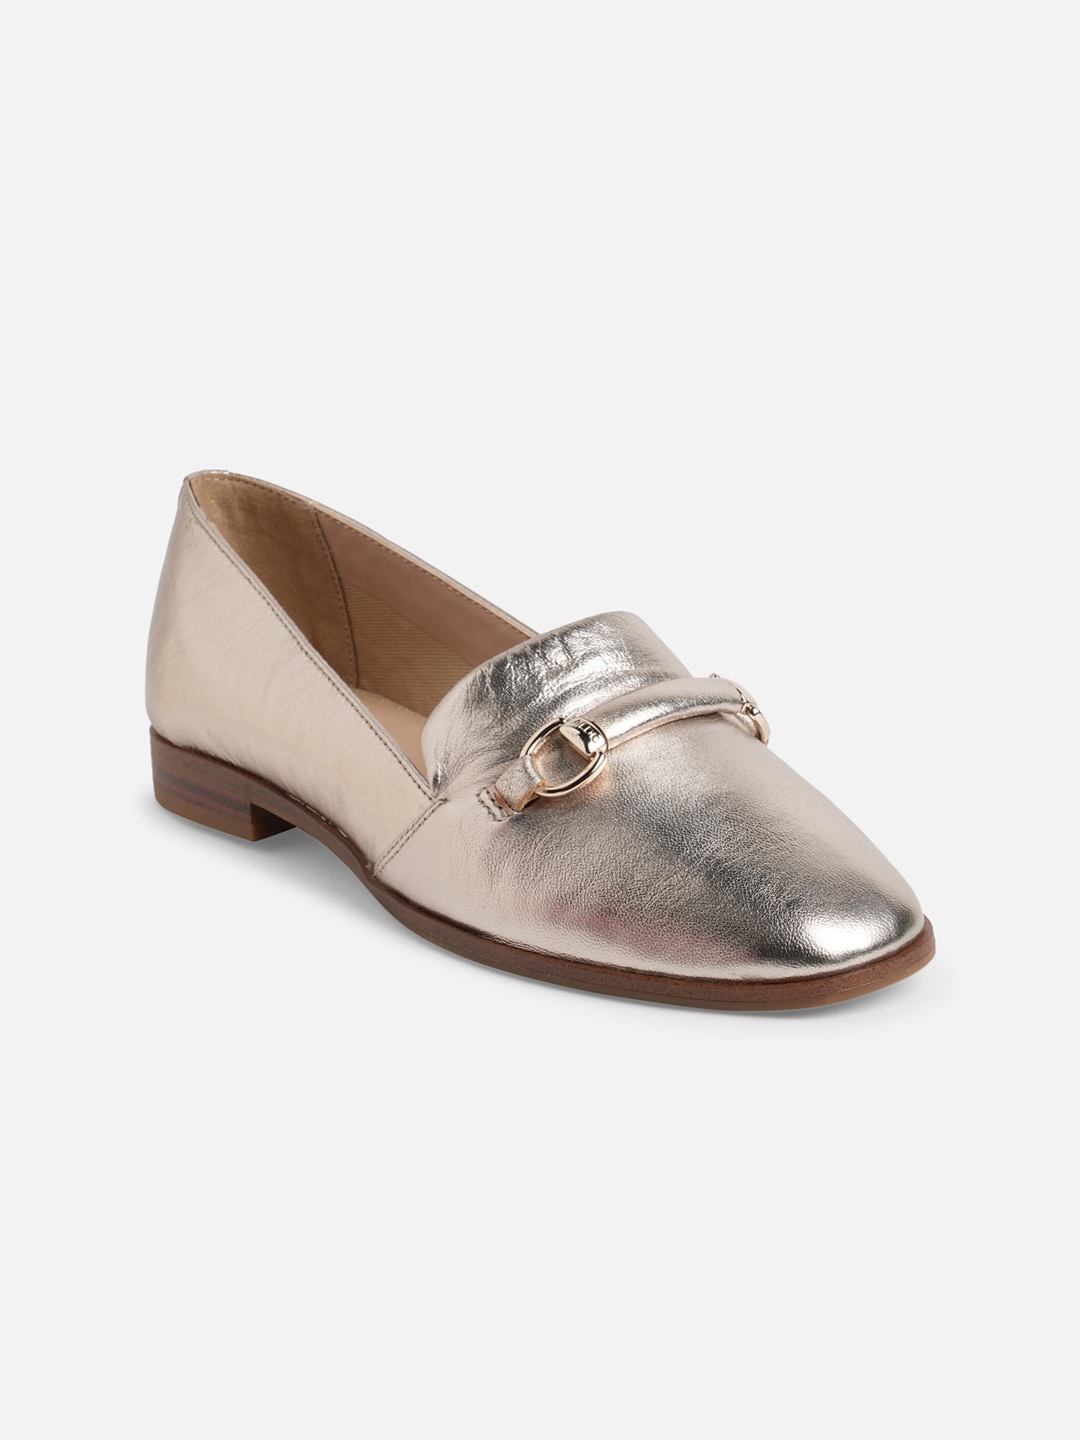 ALDO Women Silver-Toned Leather Loafers Price in India